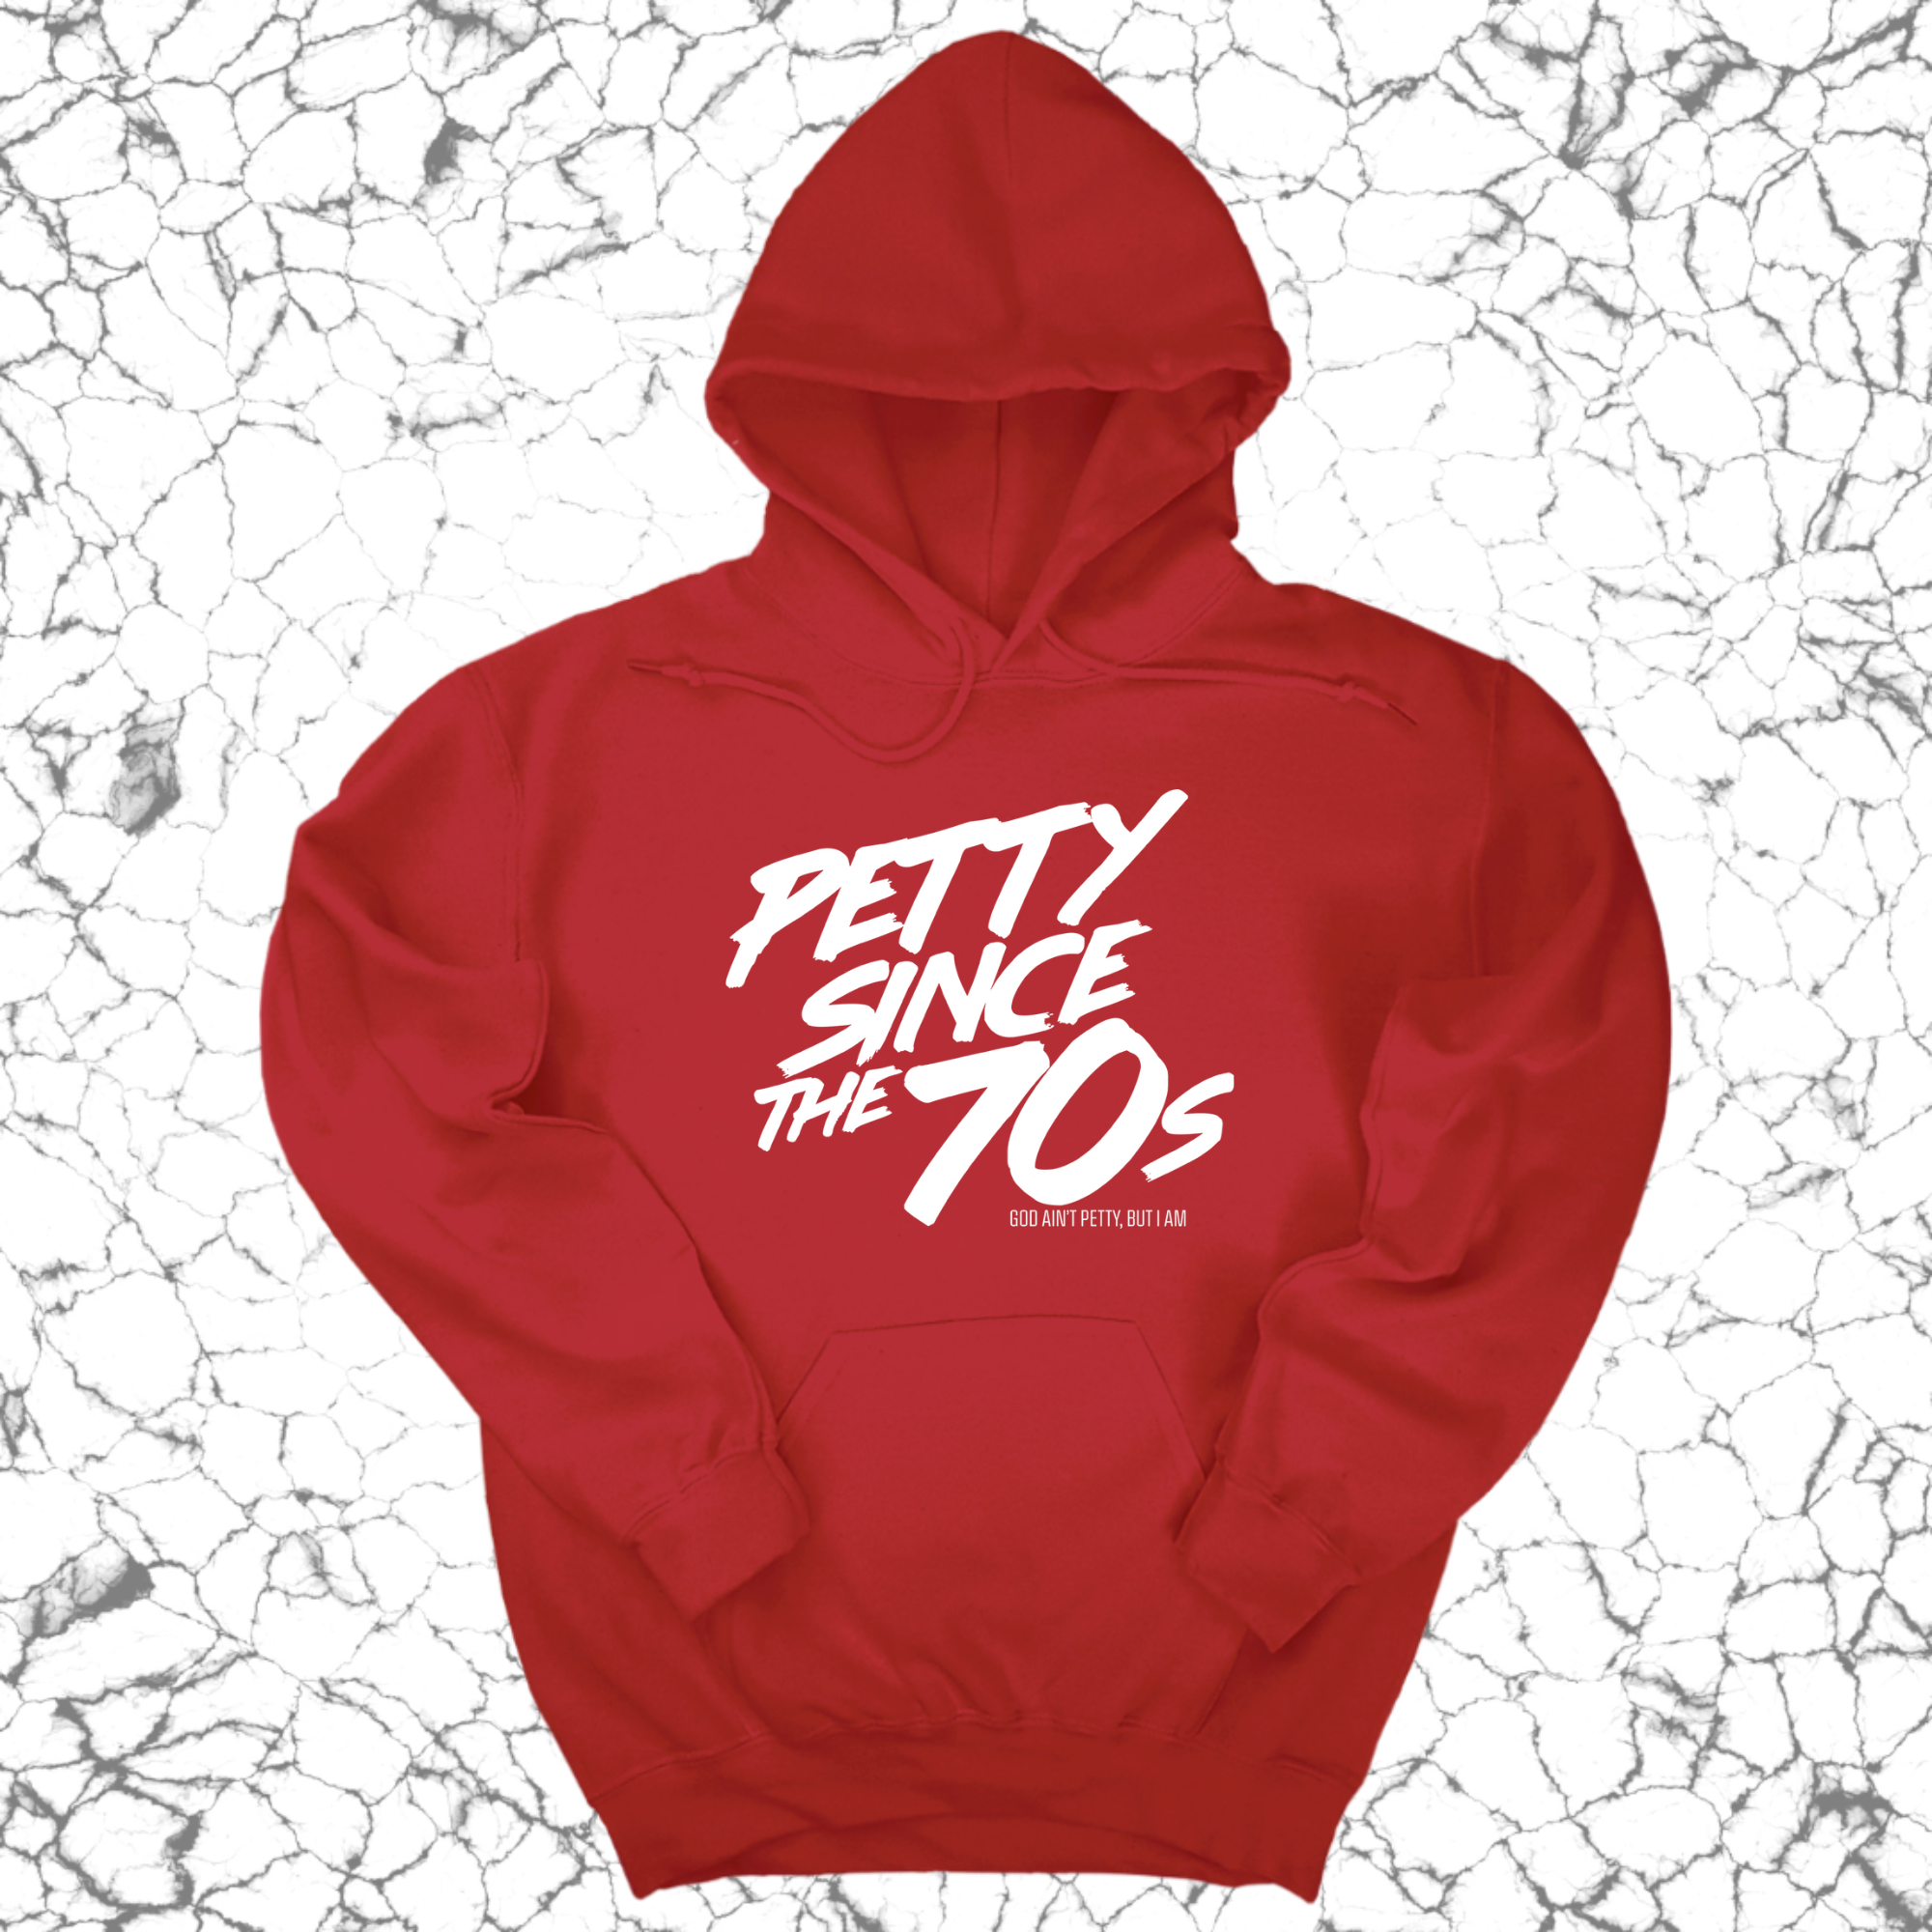 Petty Since the 70s Unisex Hoodie-Hoodie-The Original God Ain't Petty But I Am